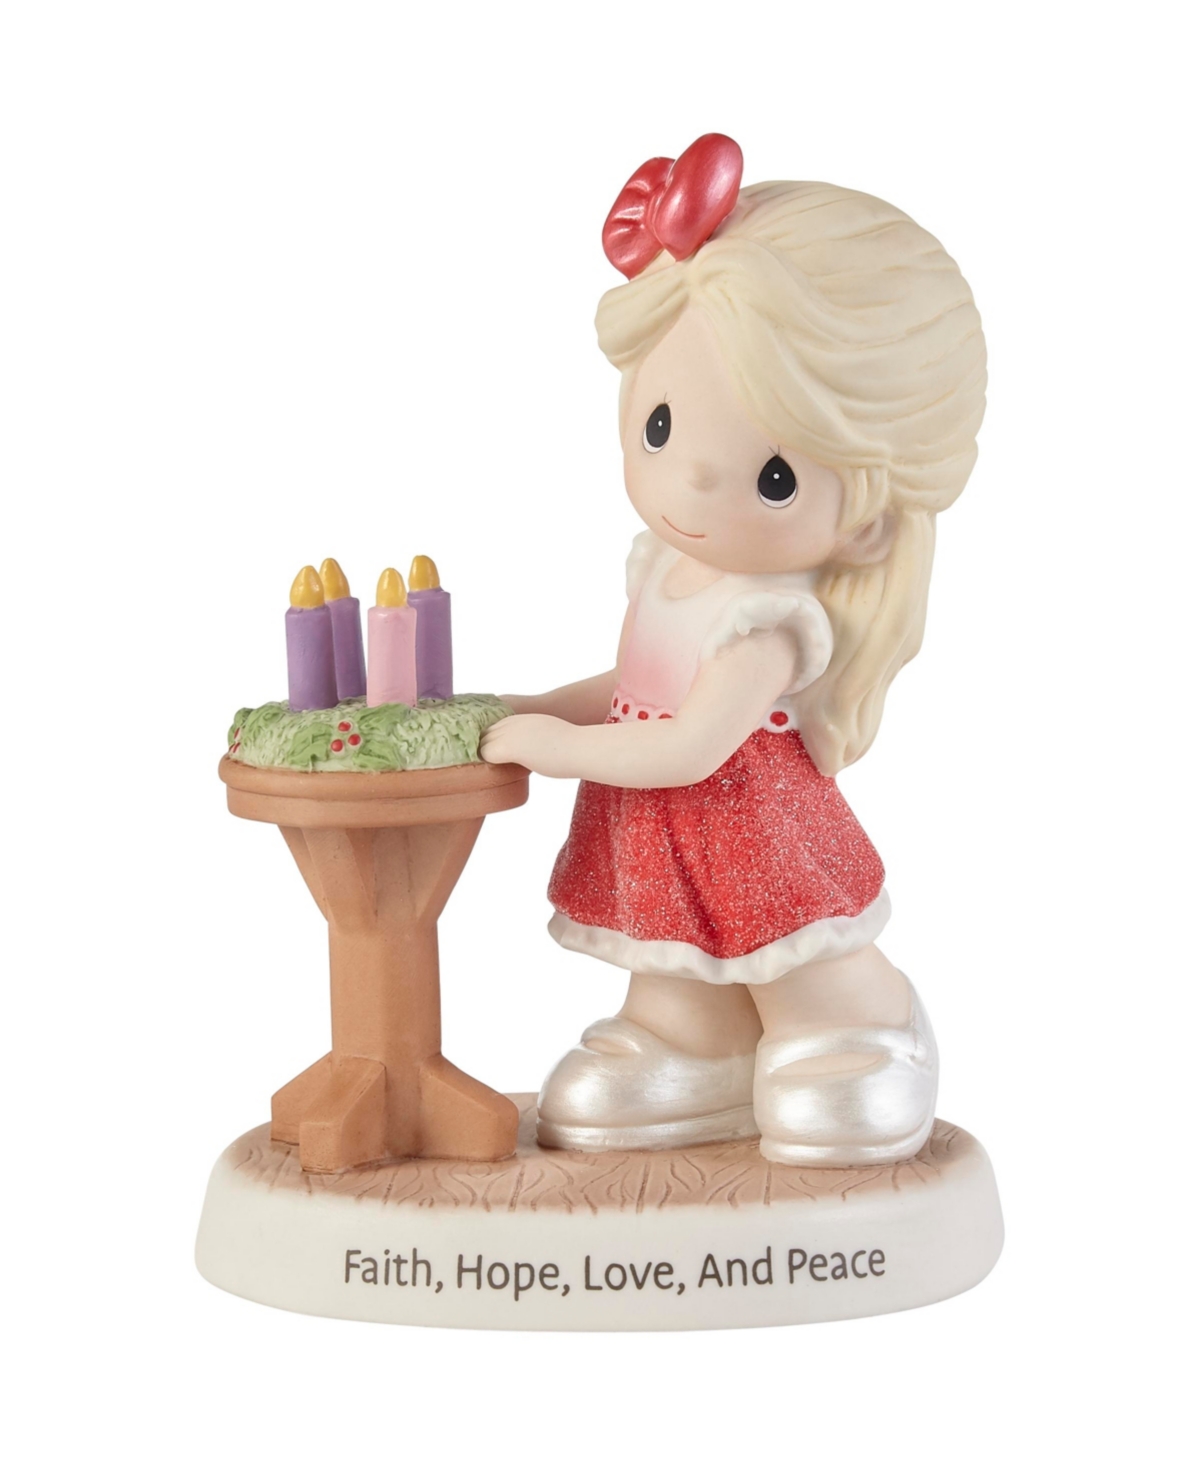 221031 Wishing You Faith, Hope, Love, and Peace Bisque Porcelain Figurine - Multicolor